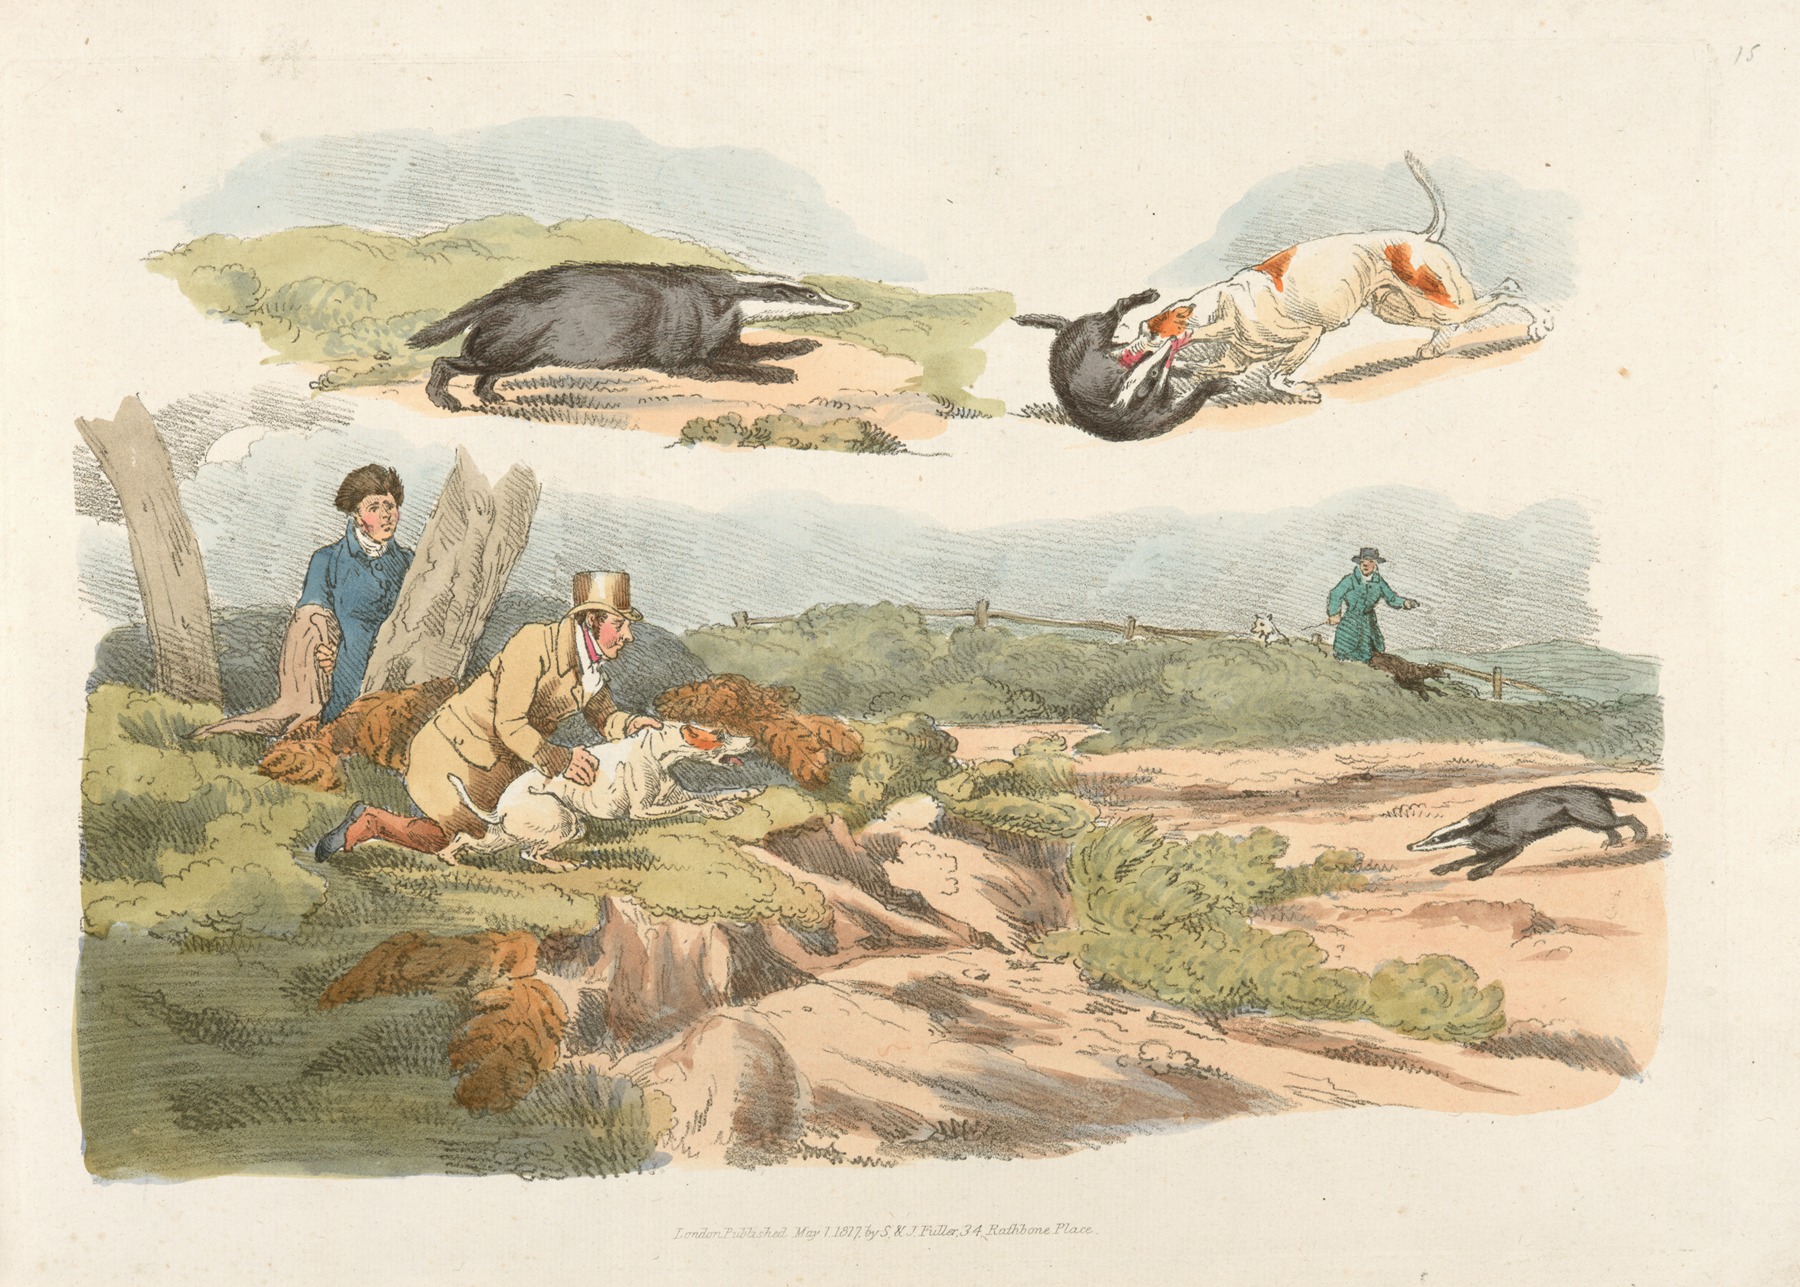 Henry Thomas Alken - Badger hunting; dogs chasing and attacking badgers